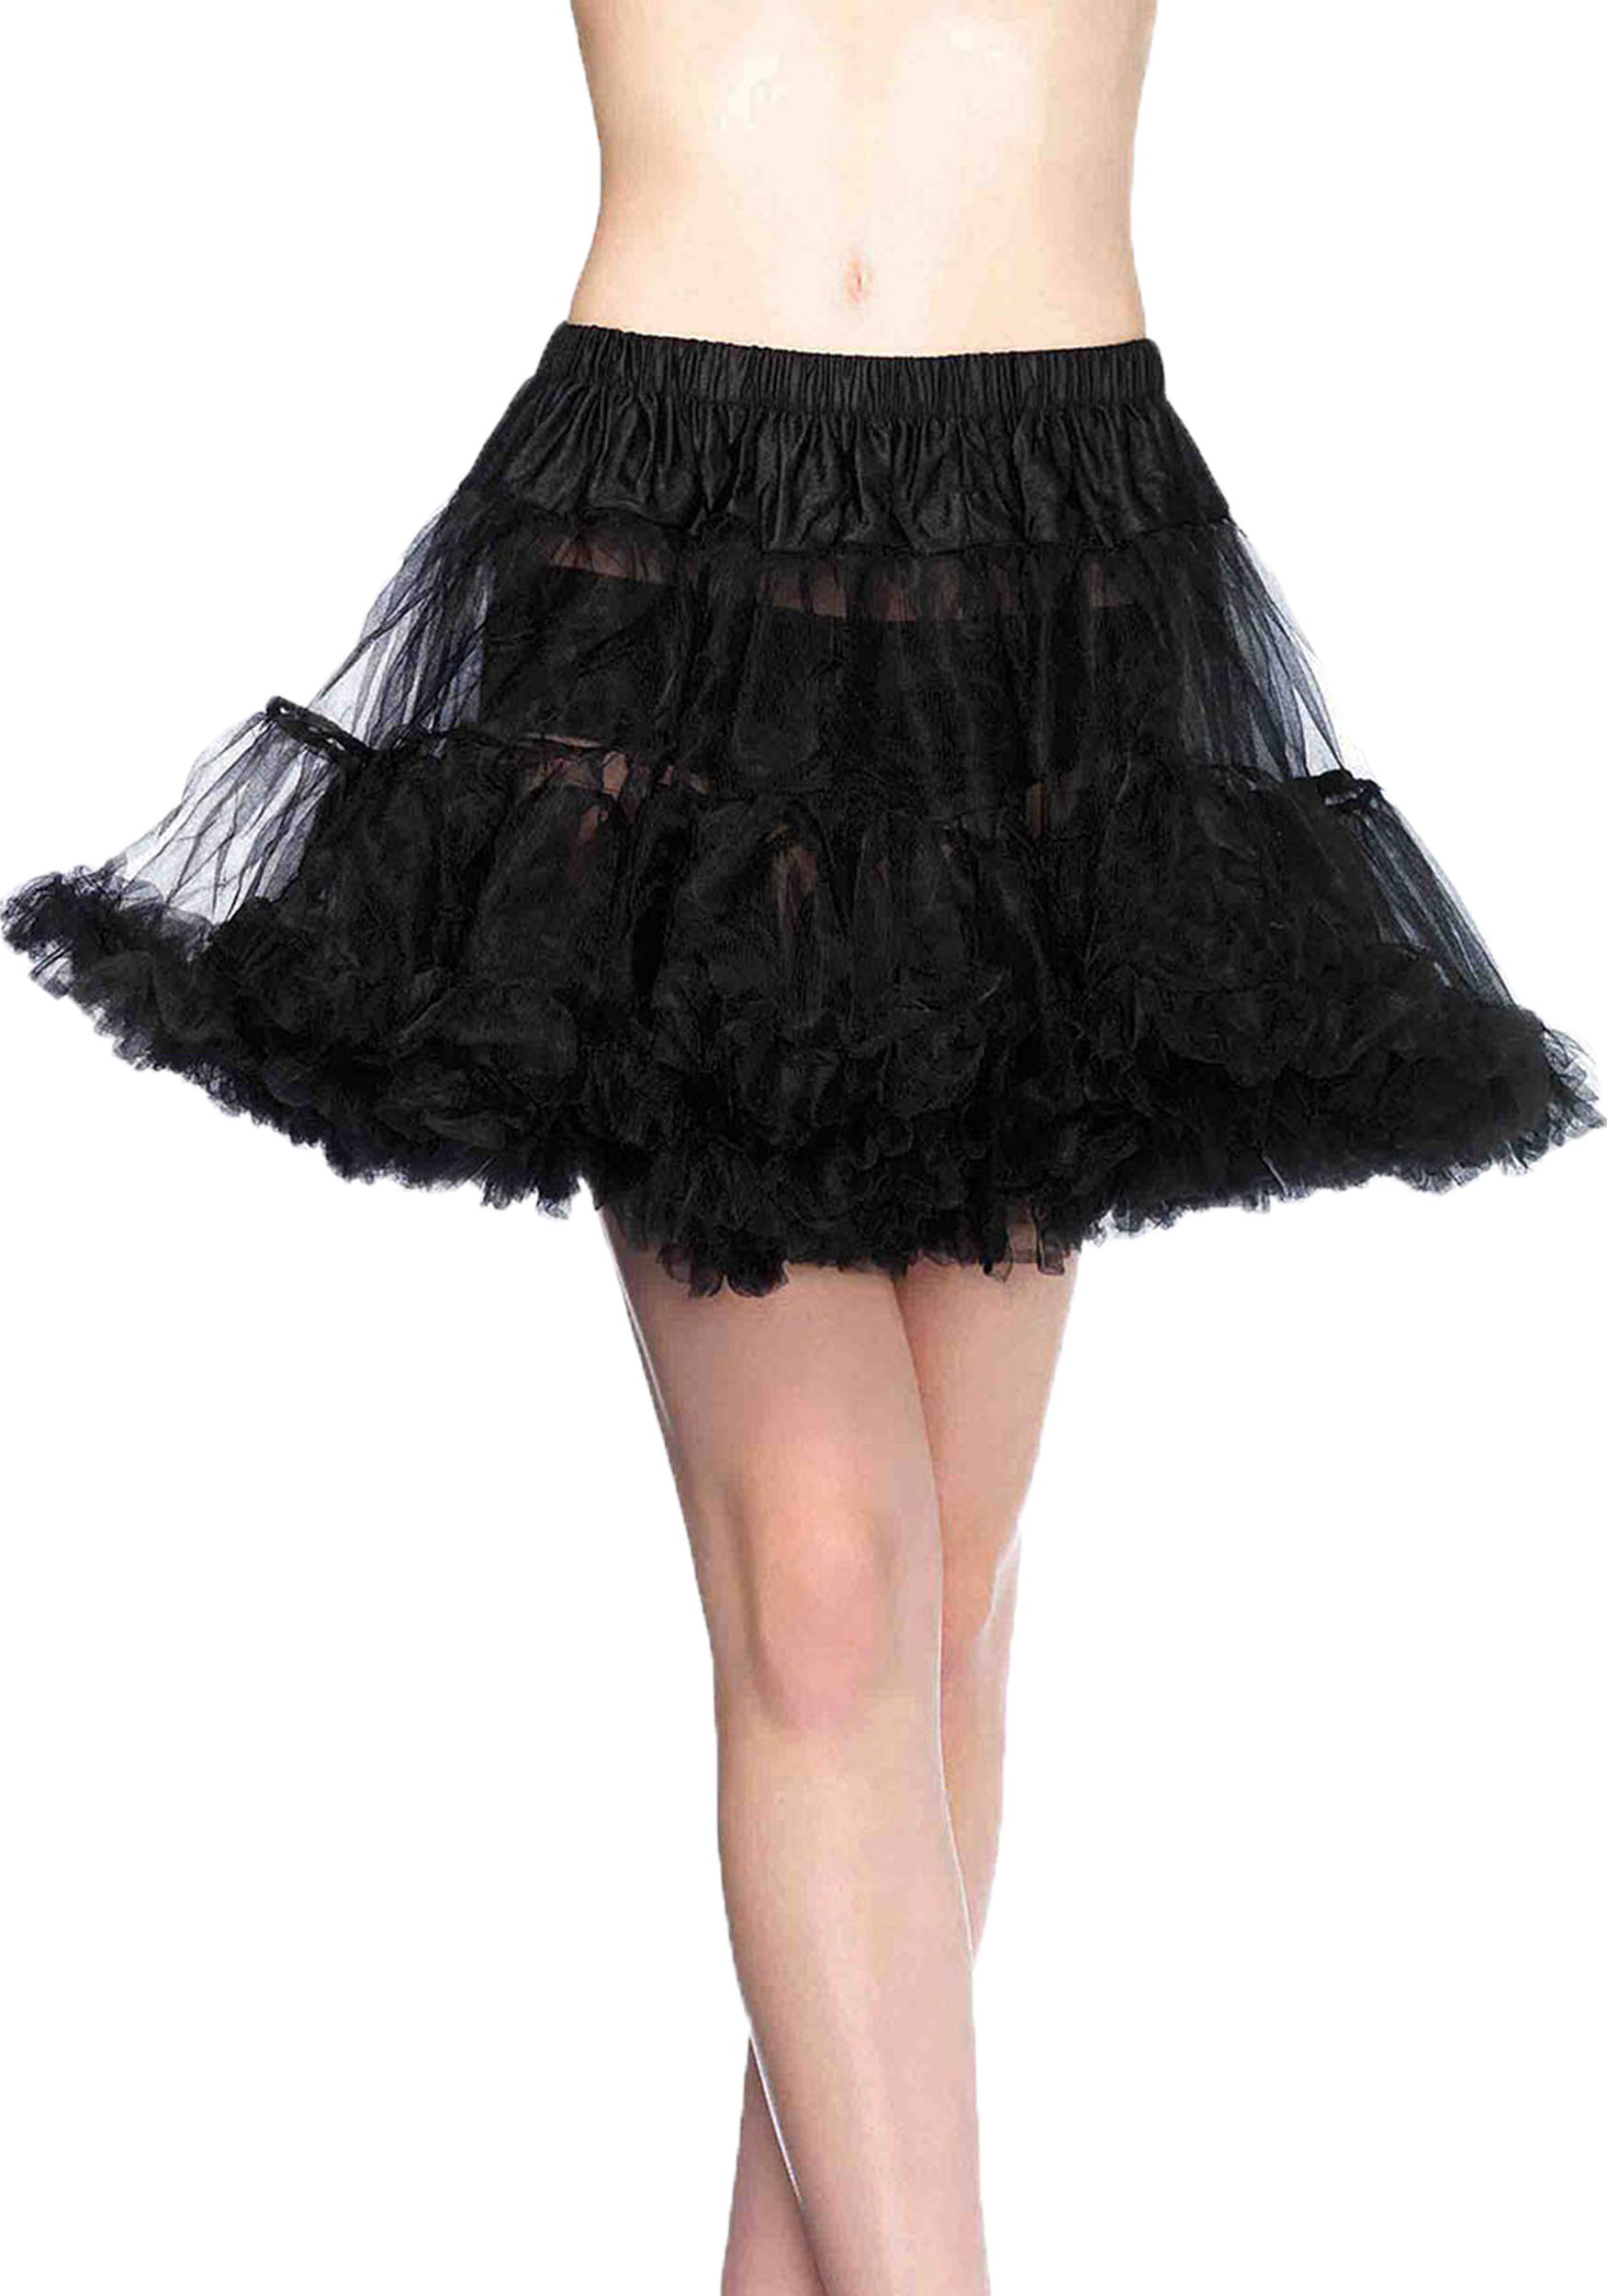 Black Layered Tulle Petticoat for Women